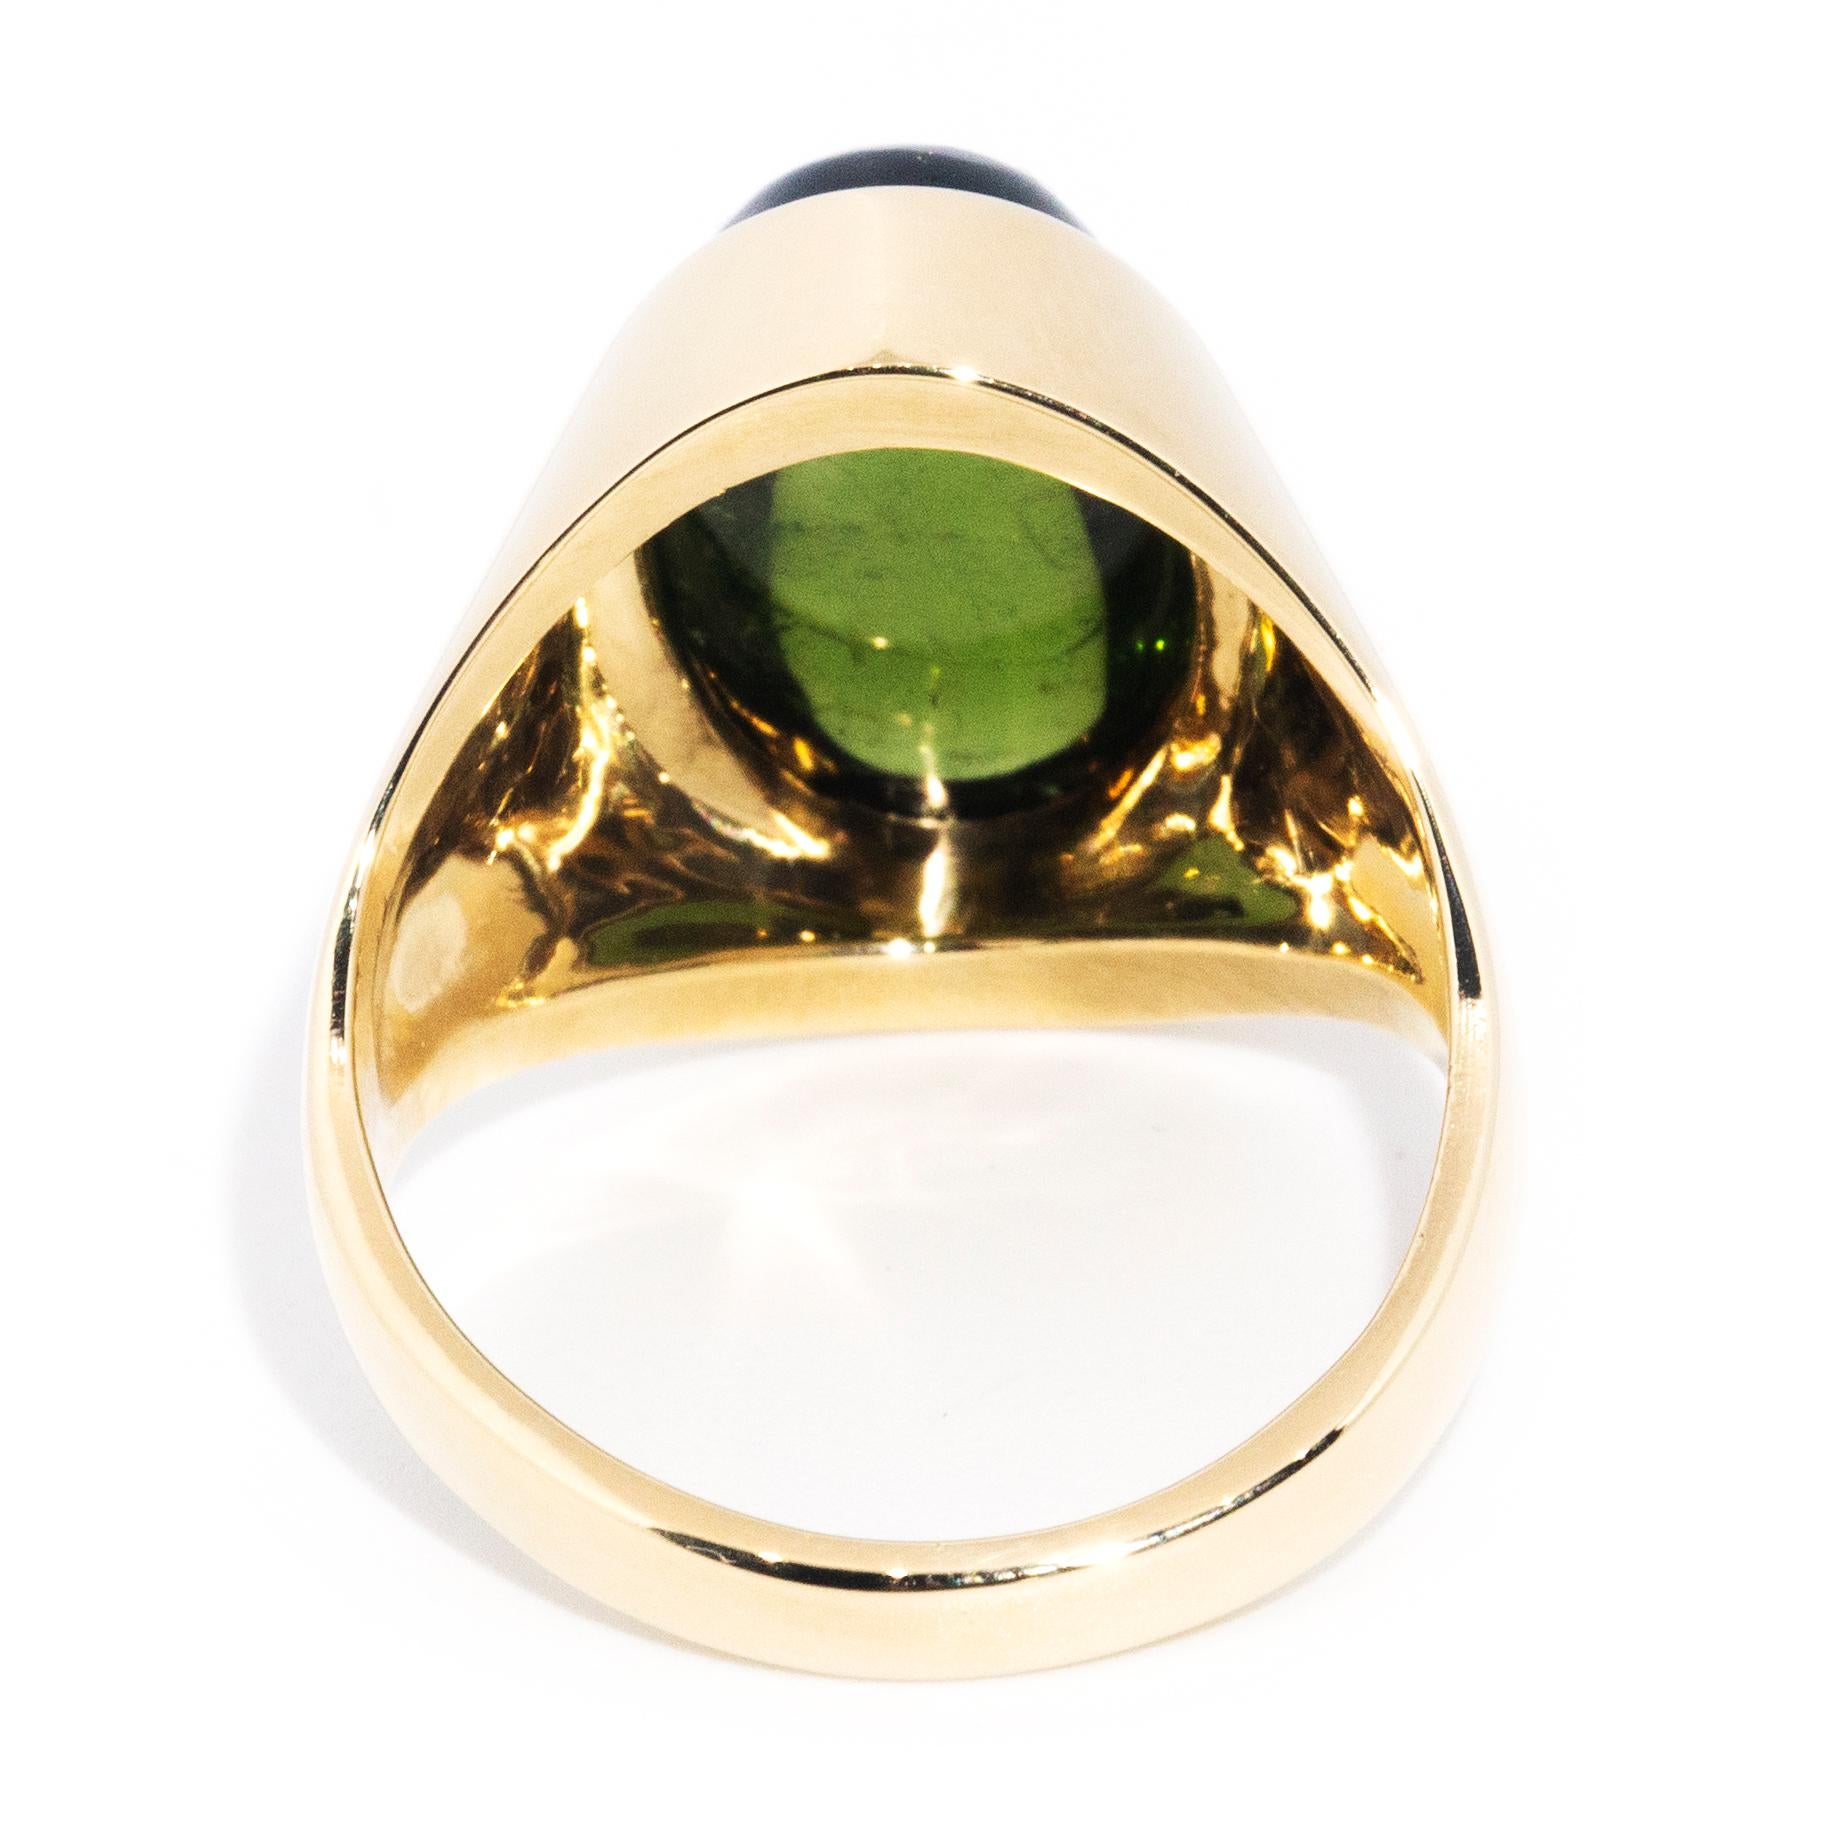 Oval Cabochon Cut Green Tourmaline Contemporary 18 Carat Gold Engagement Ring For Sale 1